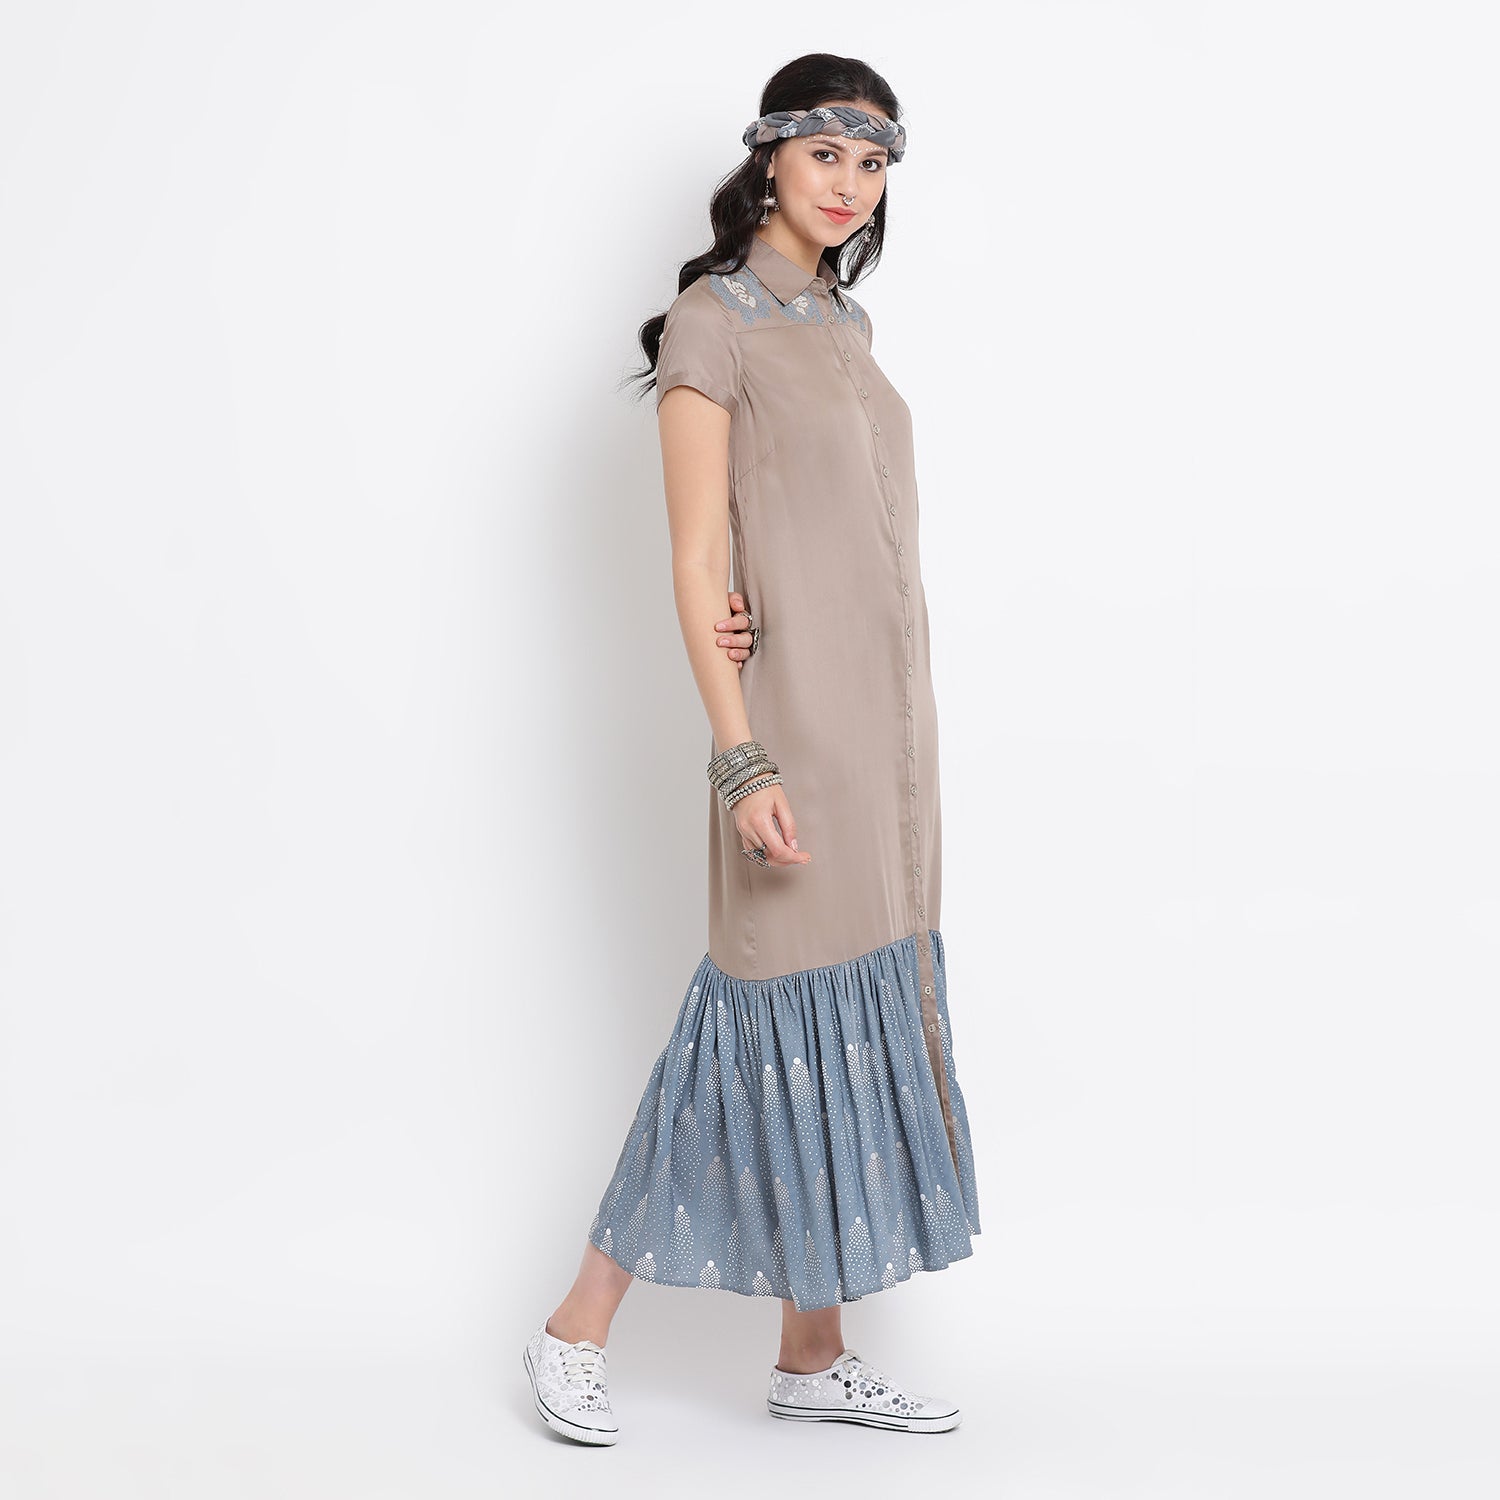 Grey viscose dress with blue thread embroidery on shoulder yoke